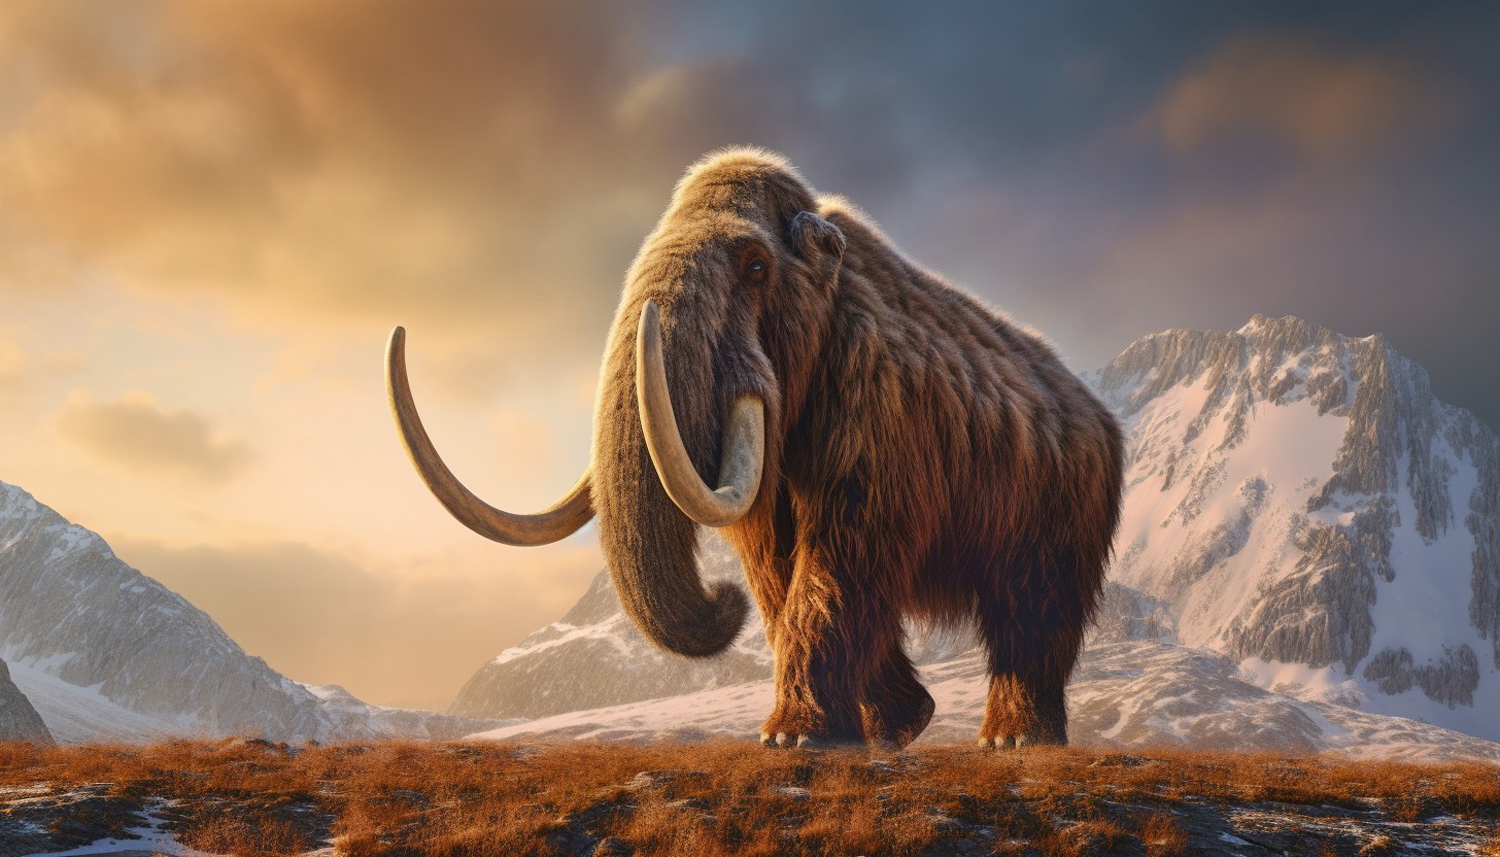 A woolly mammoth walks on brown grass with snowy peaks in the background.